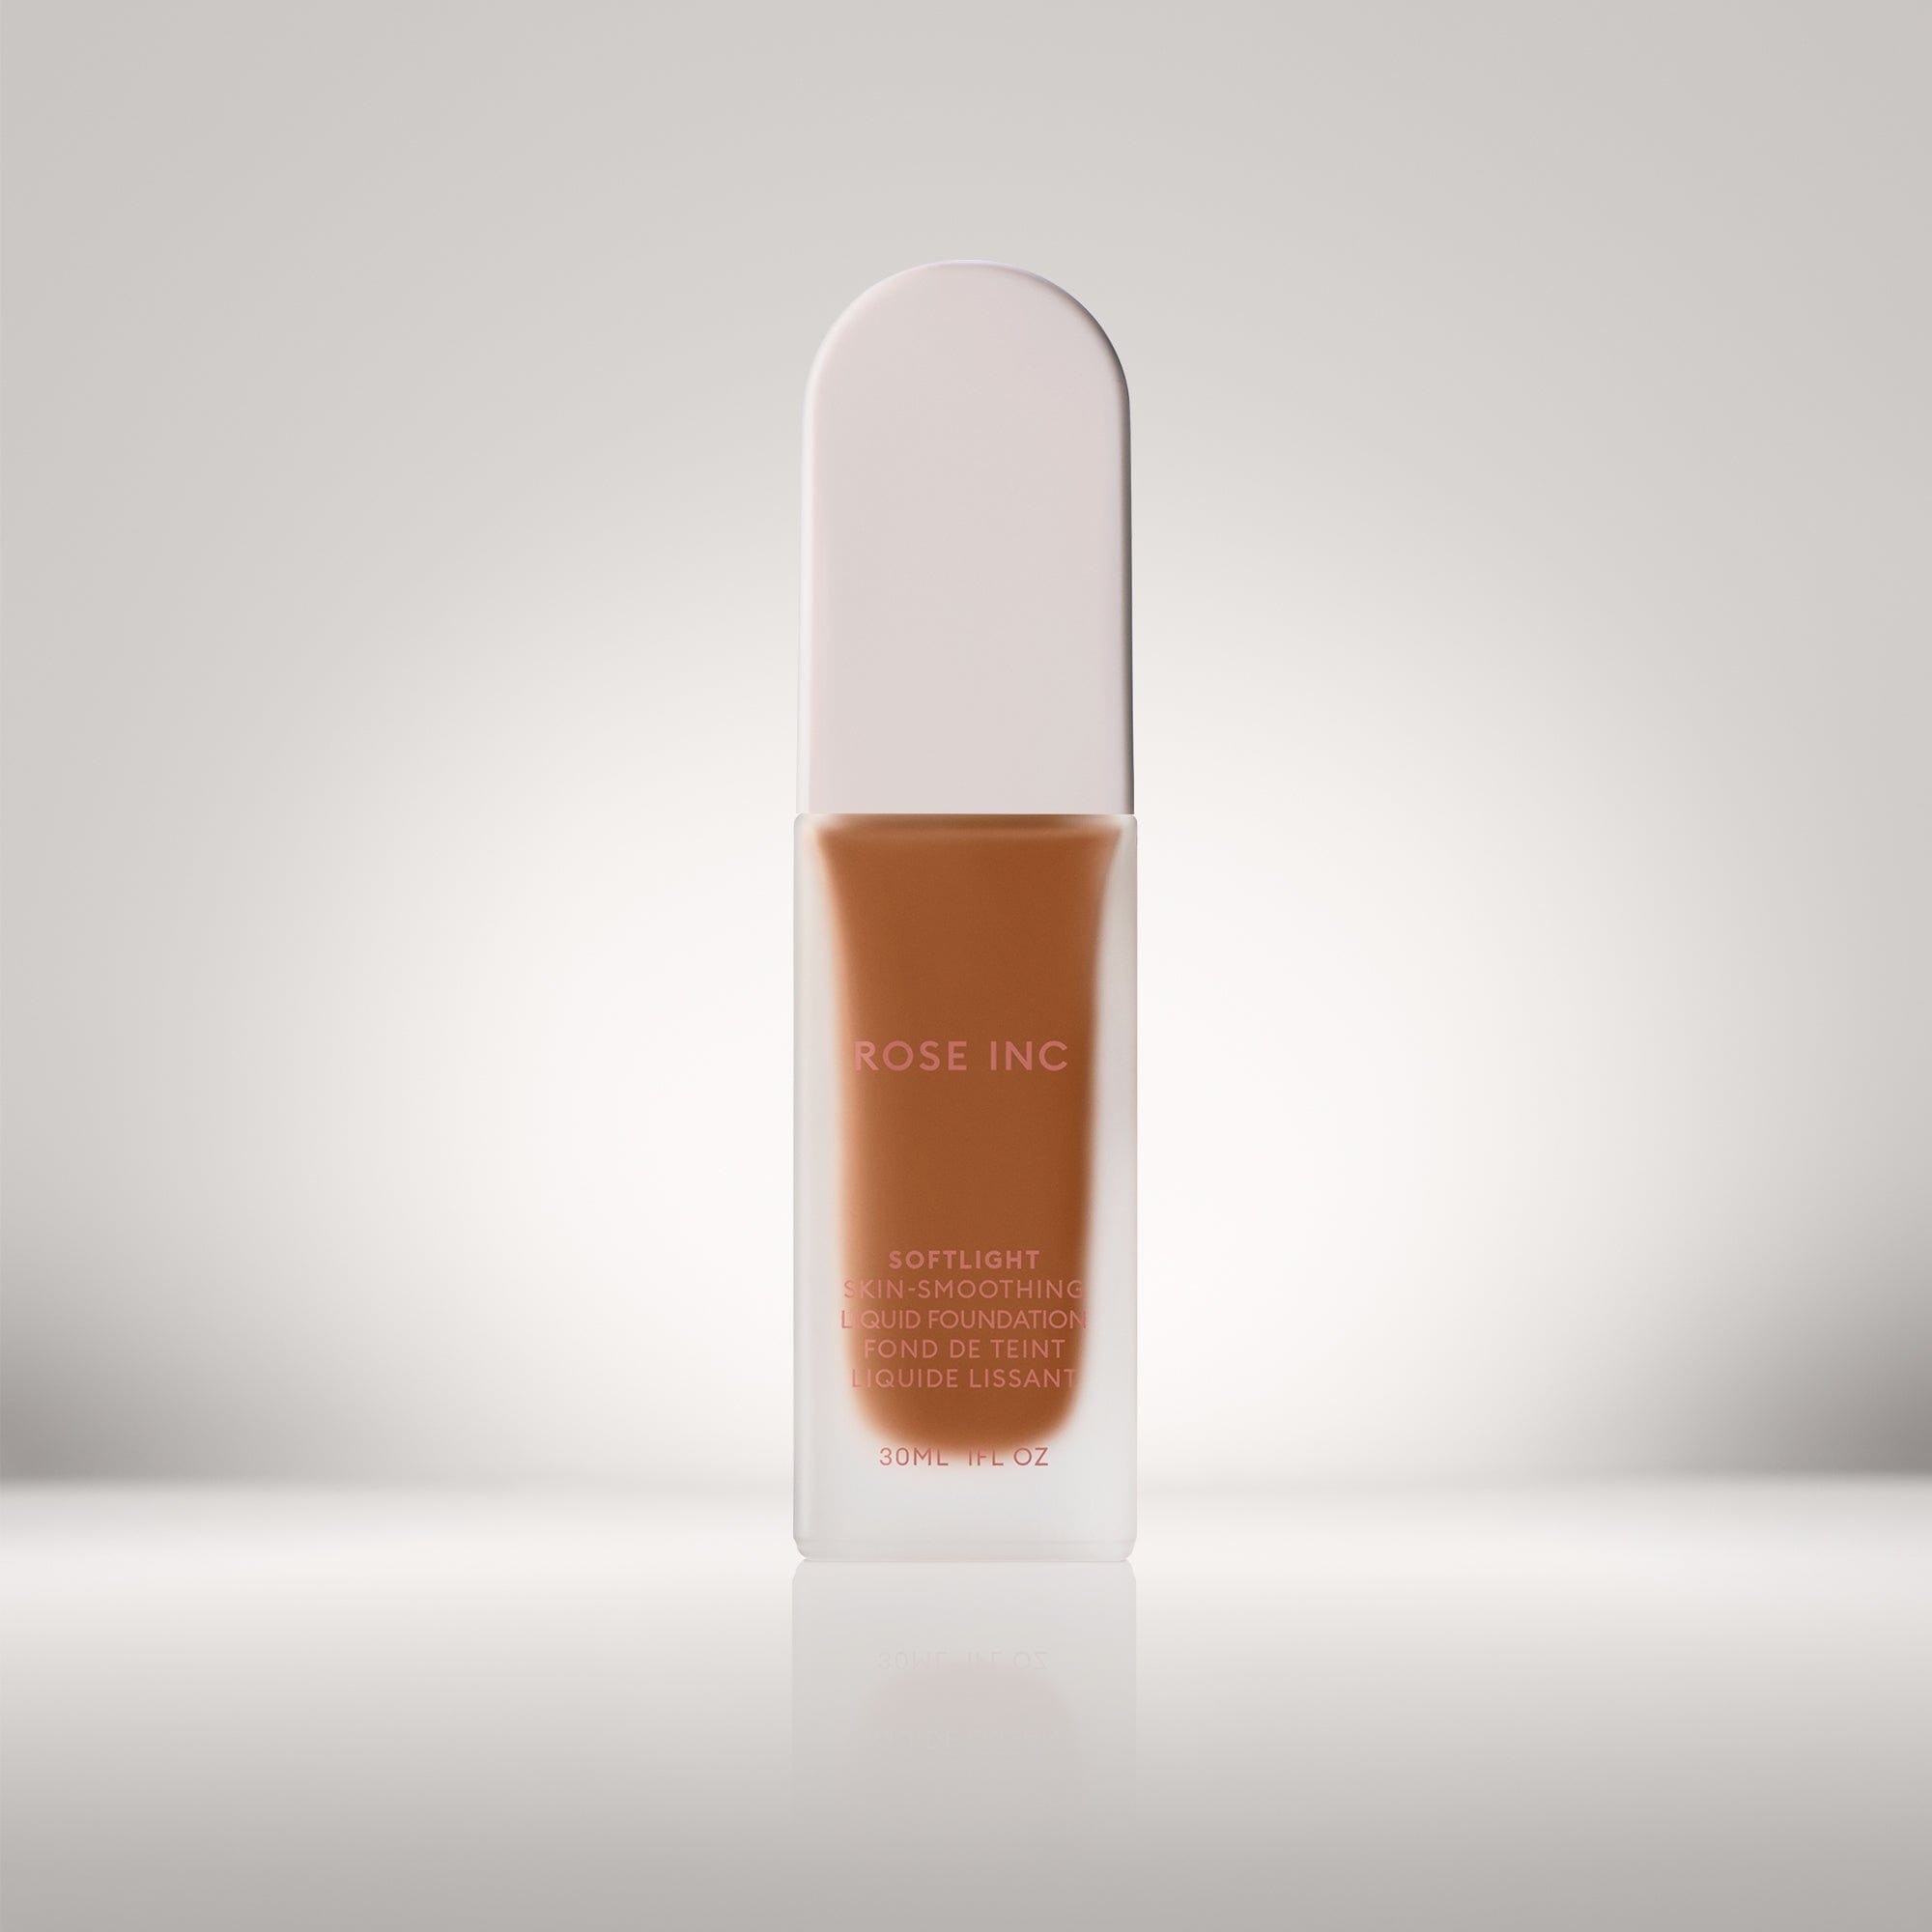 Soldier image of shade 27C in Softlight Smoothing Foundation